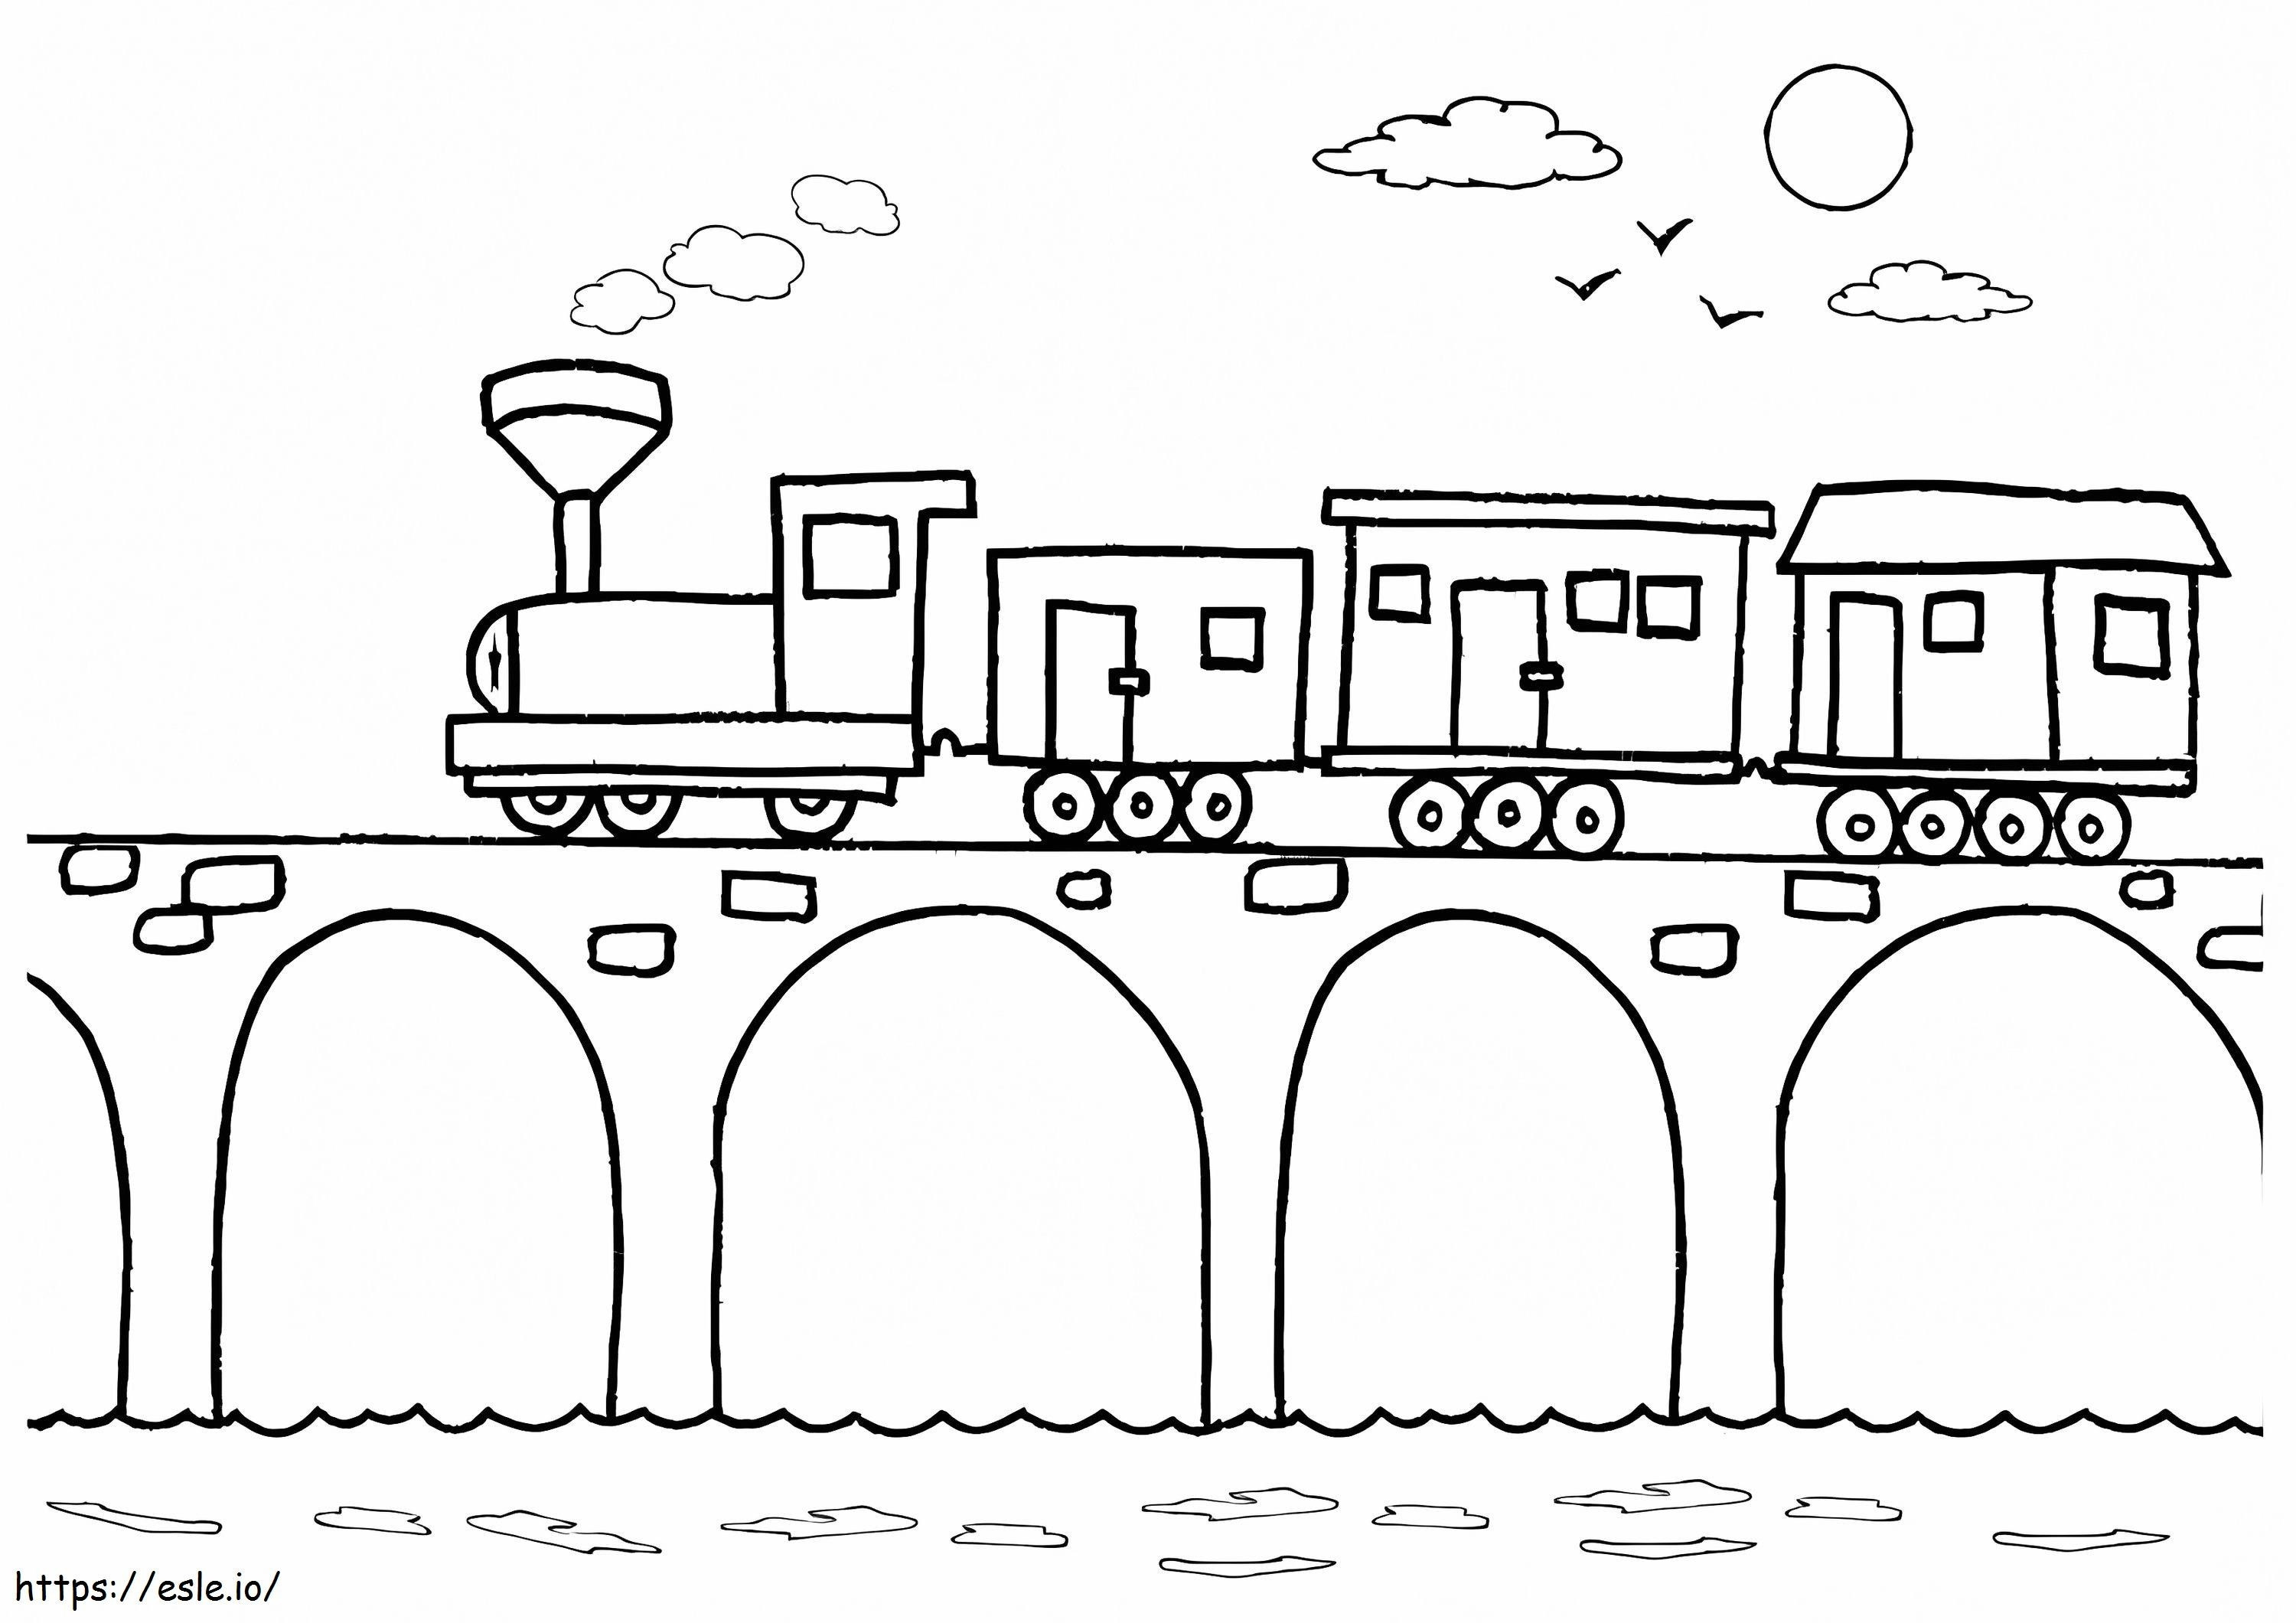 Train On The Bridge coloring page